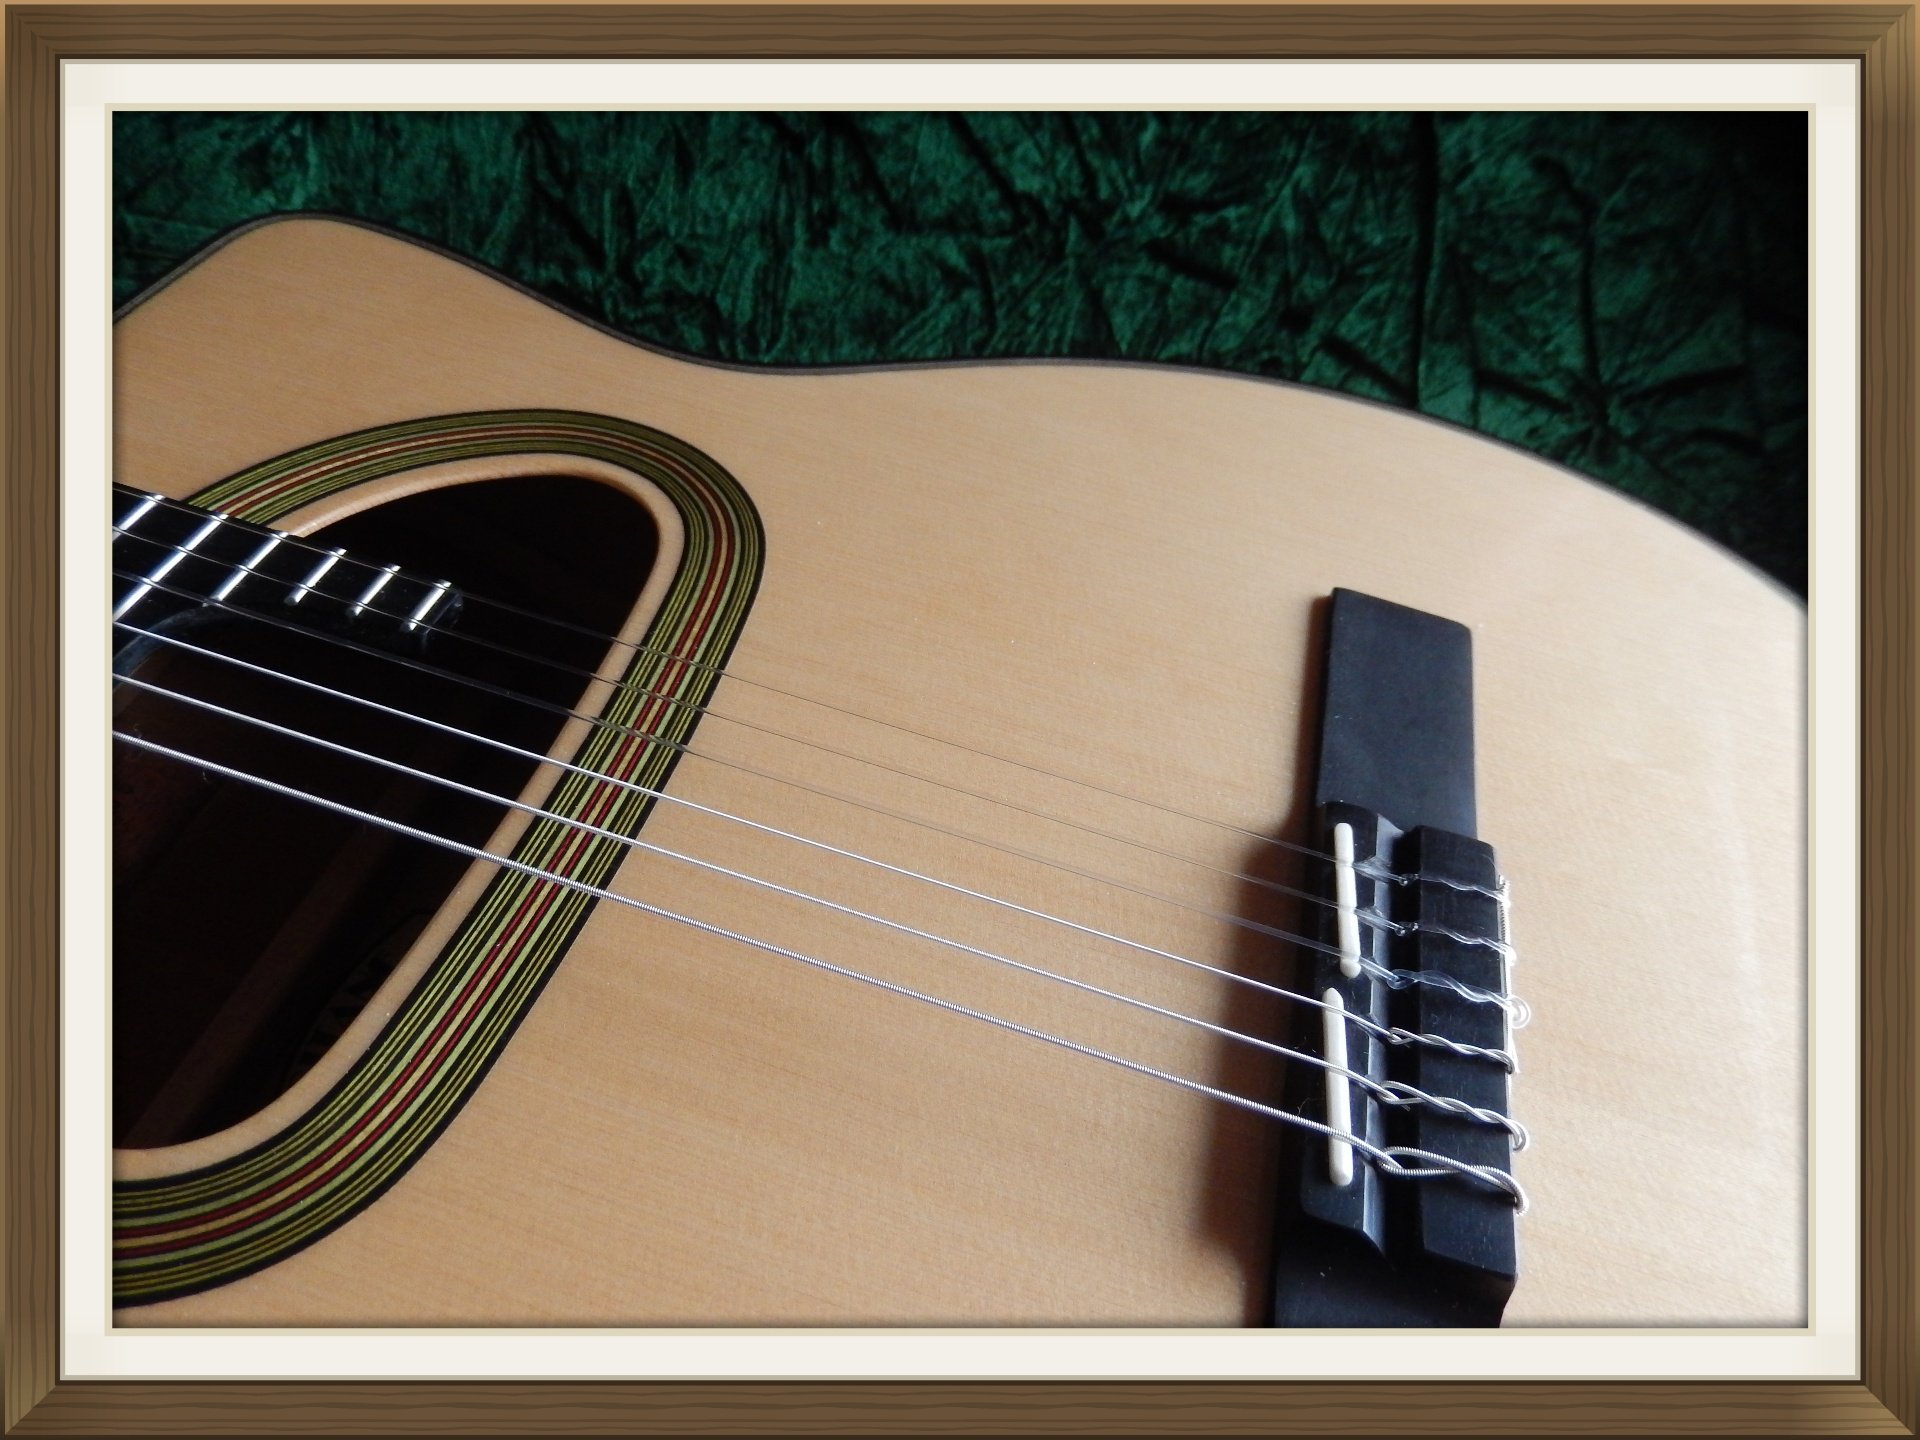 MannofieldMusic Guitar Lessons in Surbiton, Kingston upon Thames, Greater London